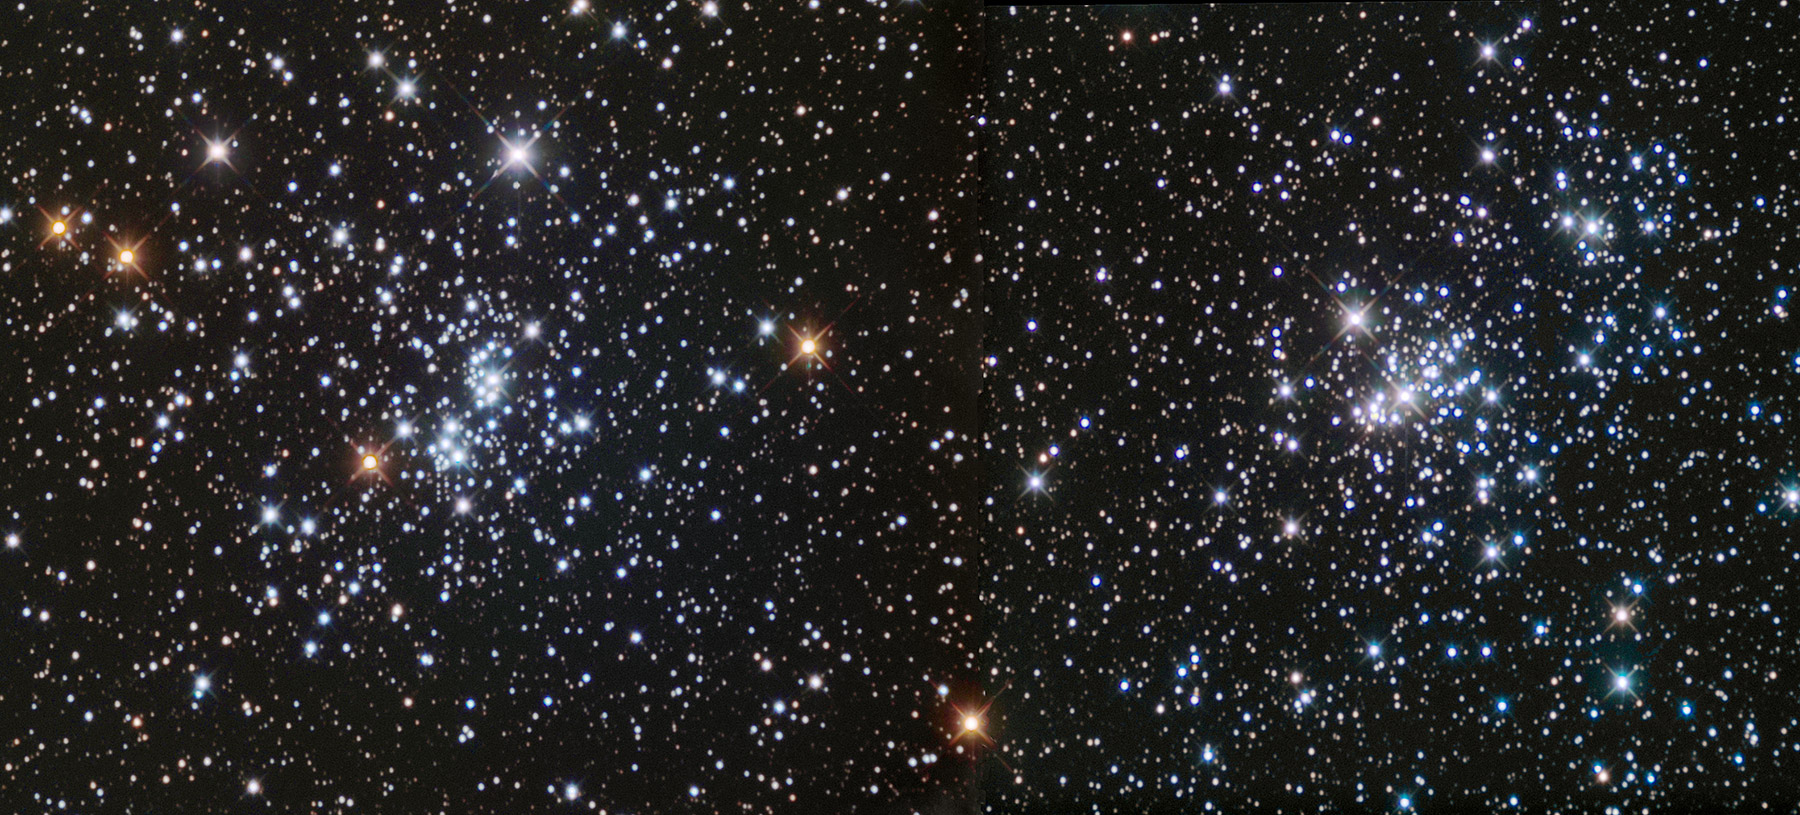 The Double Cluster - NGC 884 869